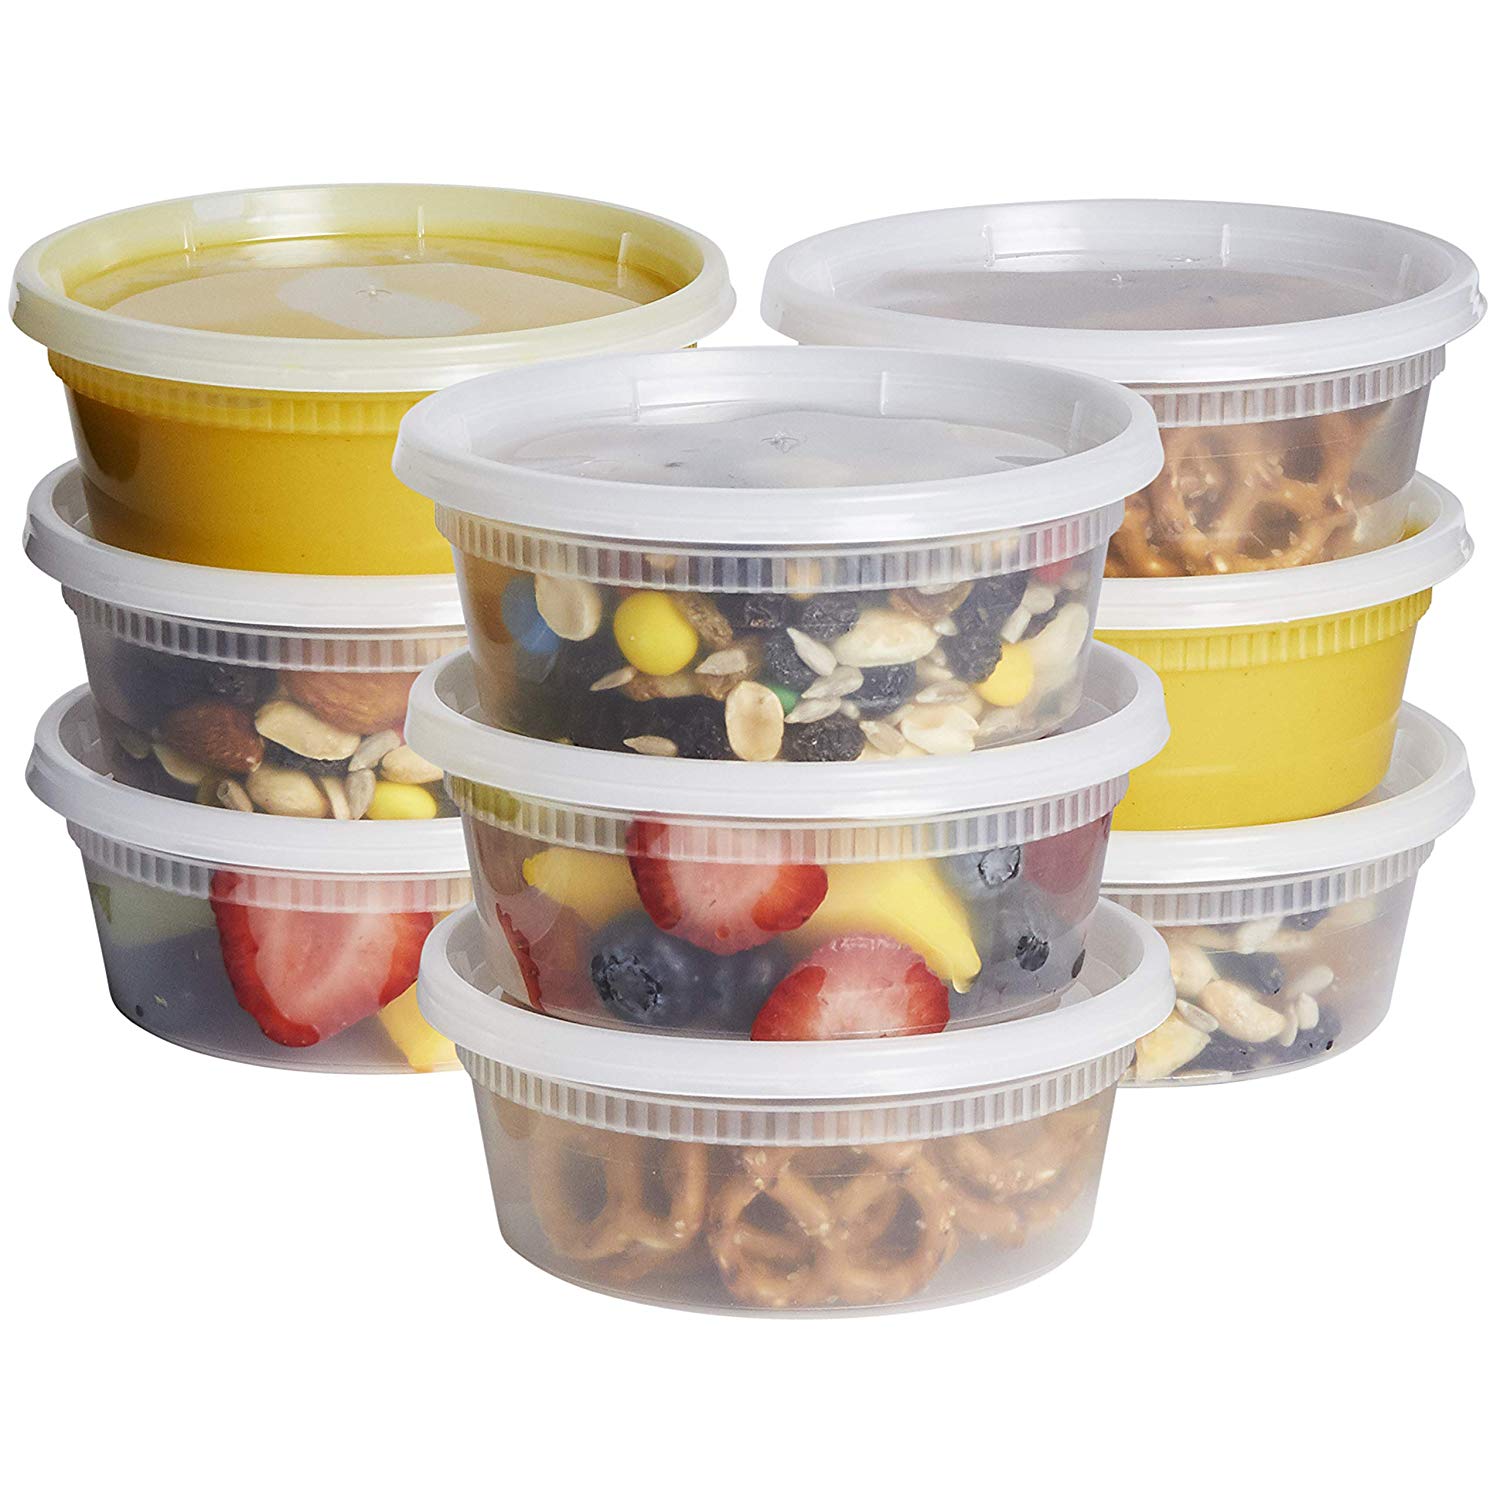 Pantry Value 24 Oz Deli Containers with Lids Food Prep Containers, 24-Pack